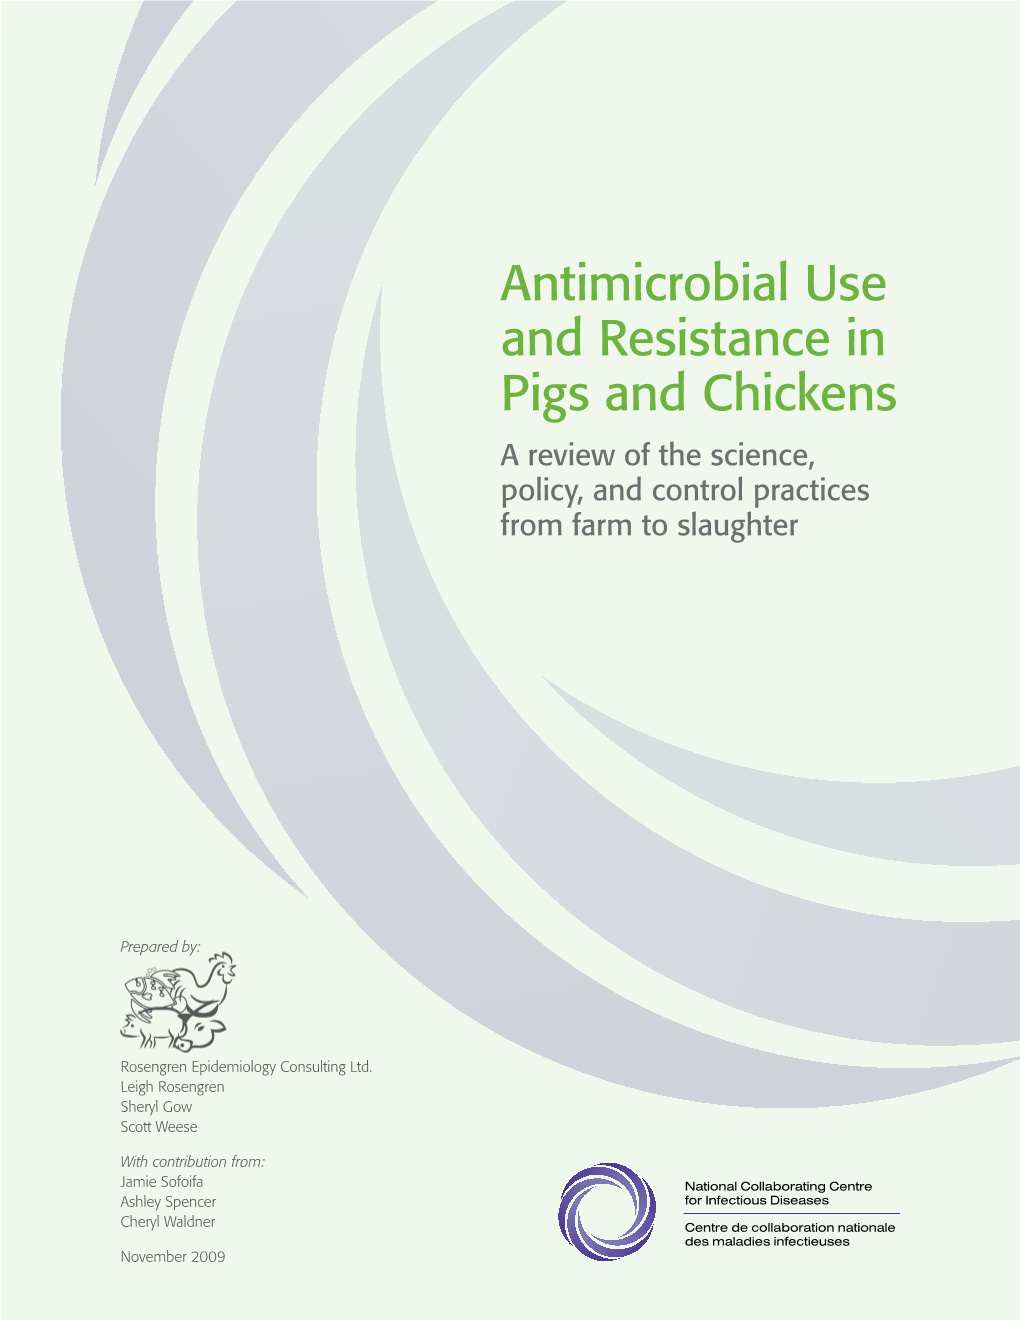 Antimicrobial Use and Resistance in Pigs and Chickens a Review of the Science, Policy, and Control Practices from Farm to Slaughter